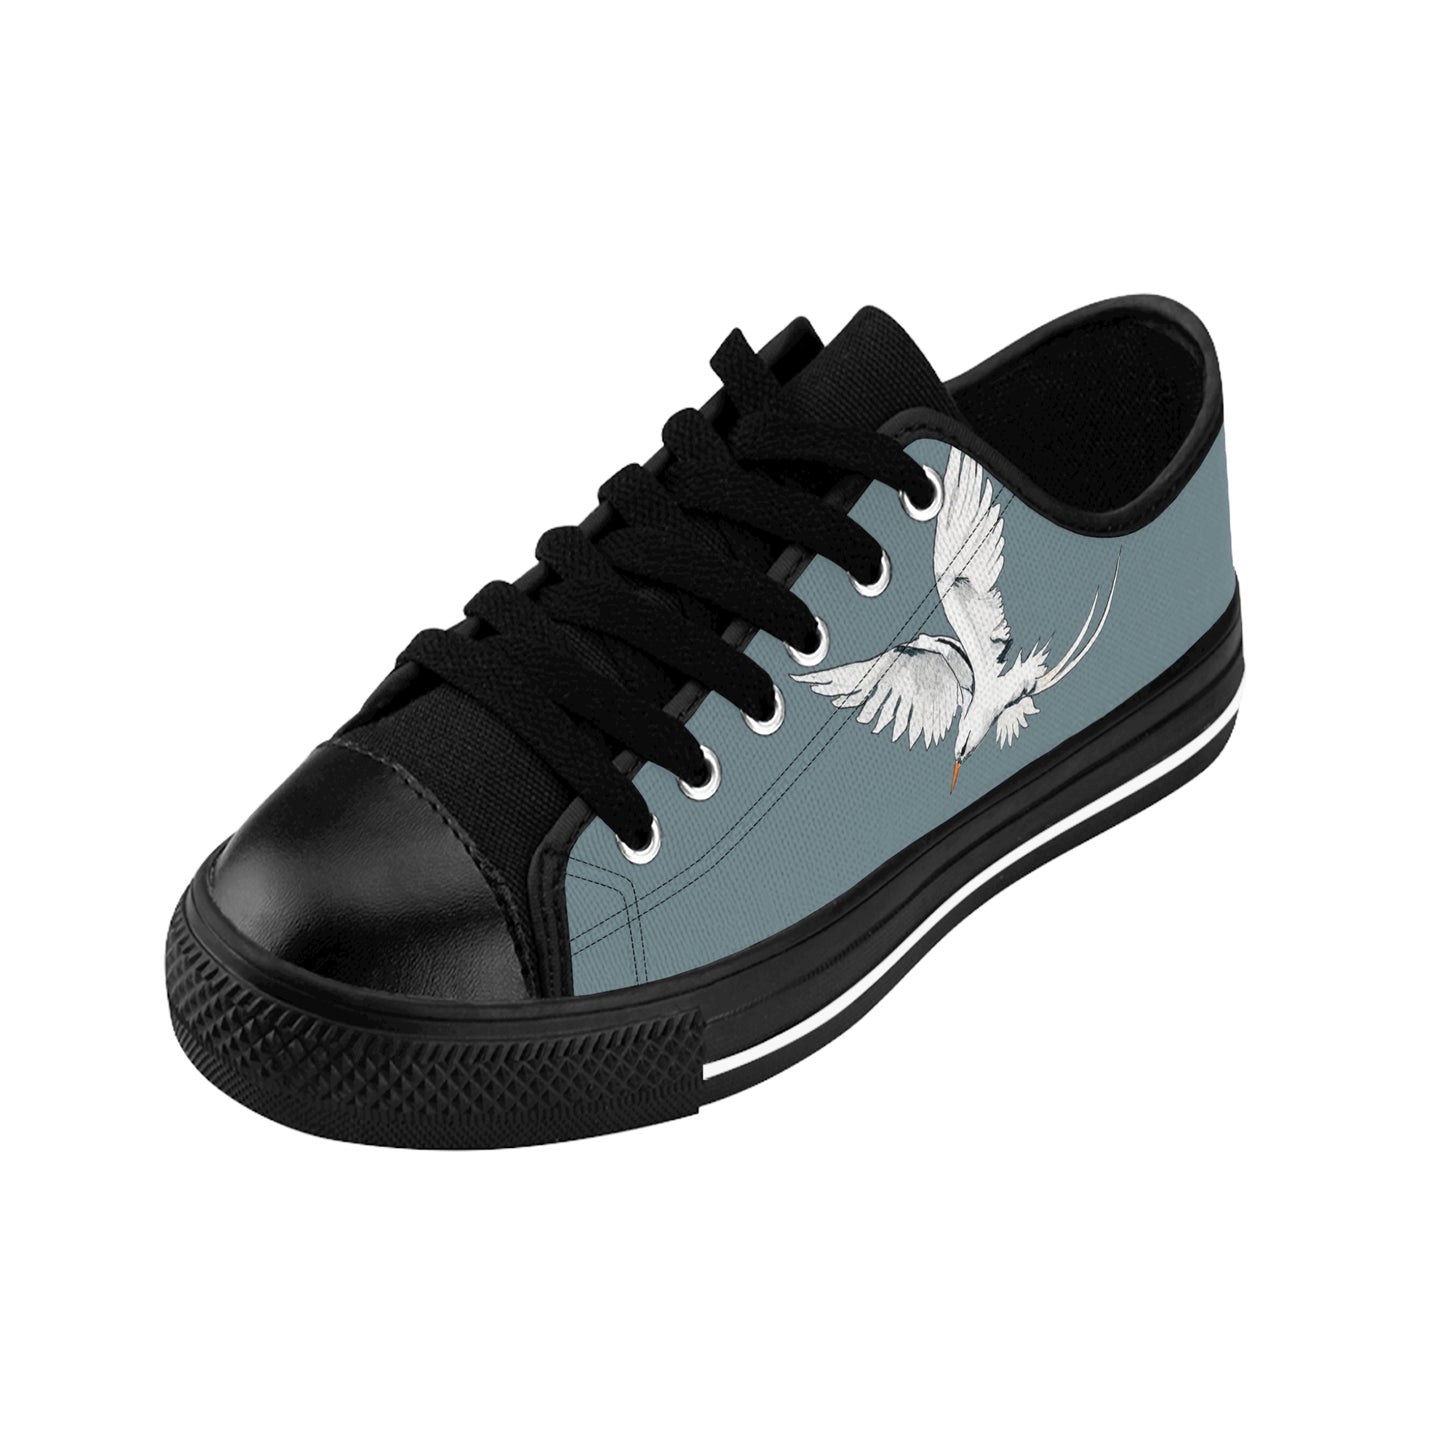 Longtails - Low Top Sneakers - Stone